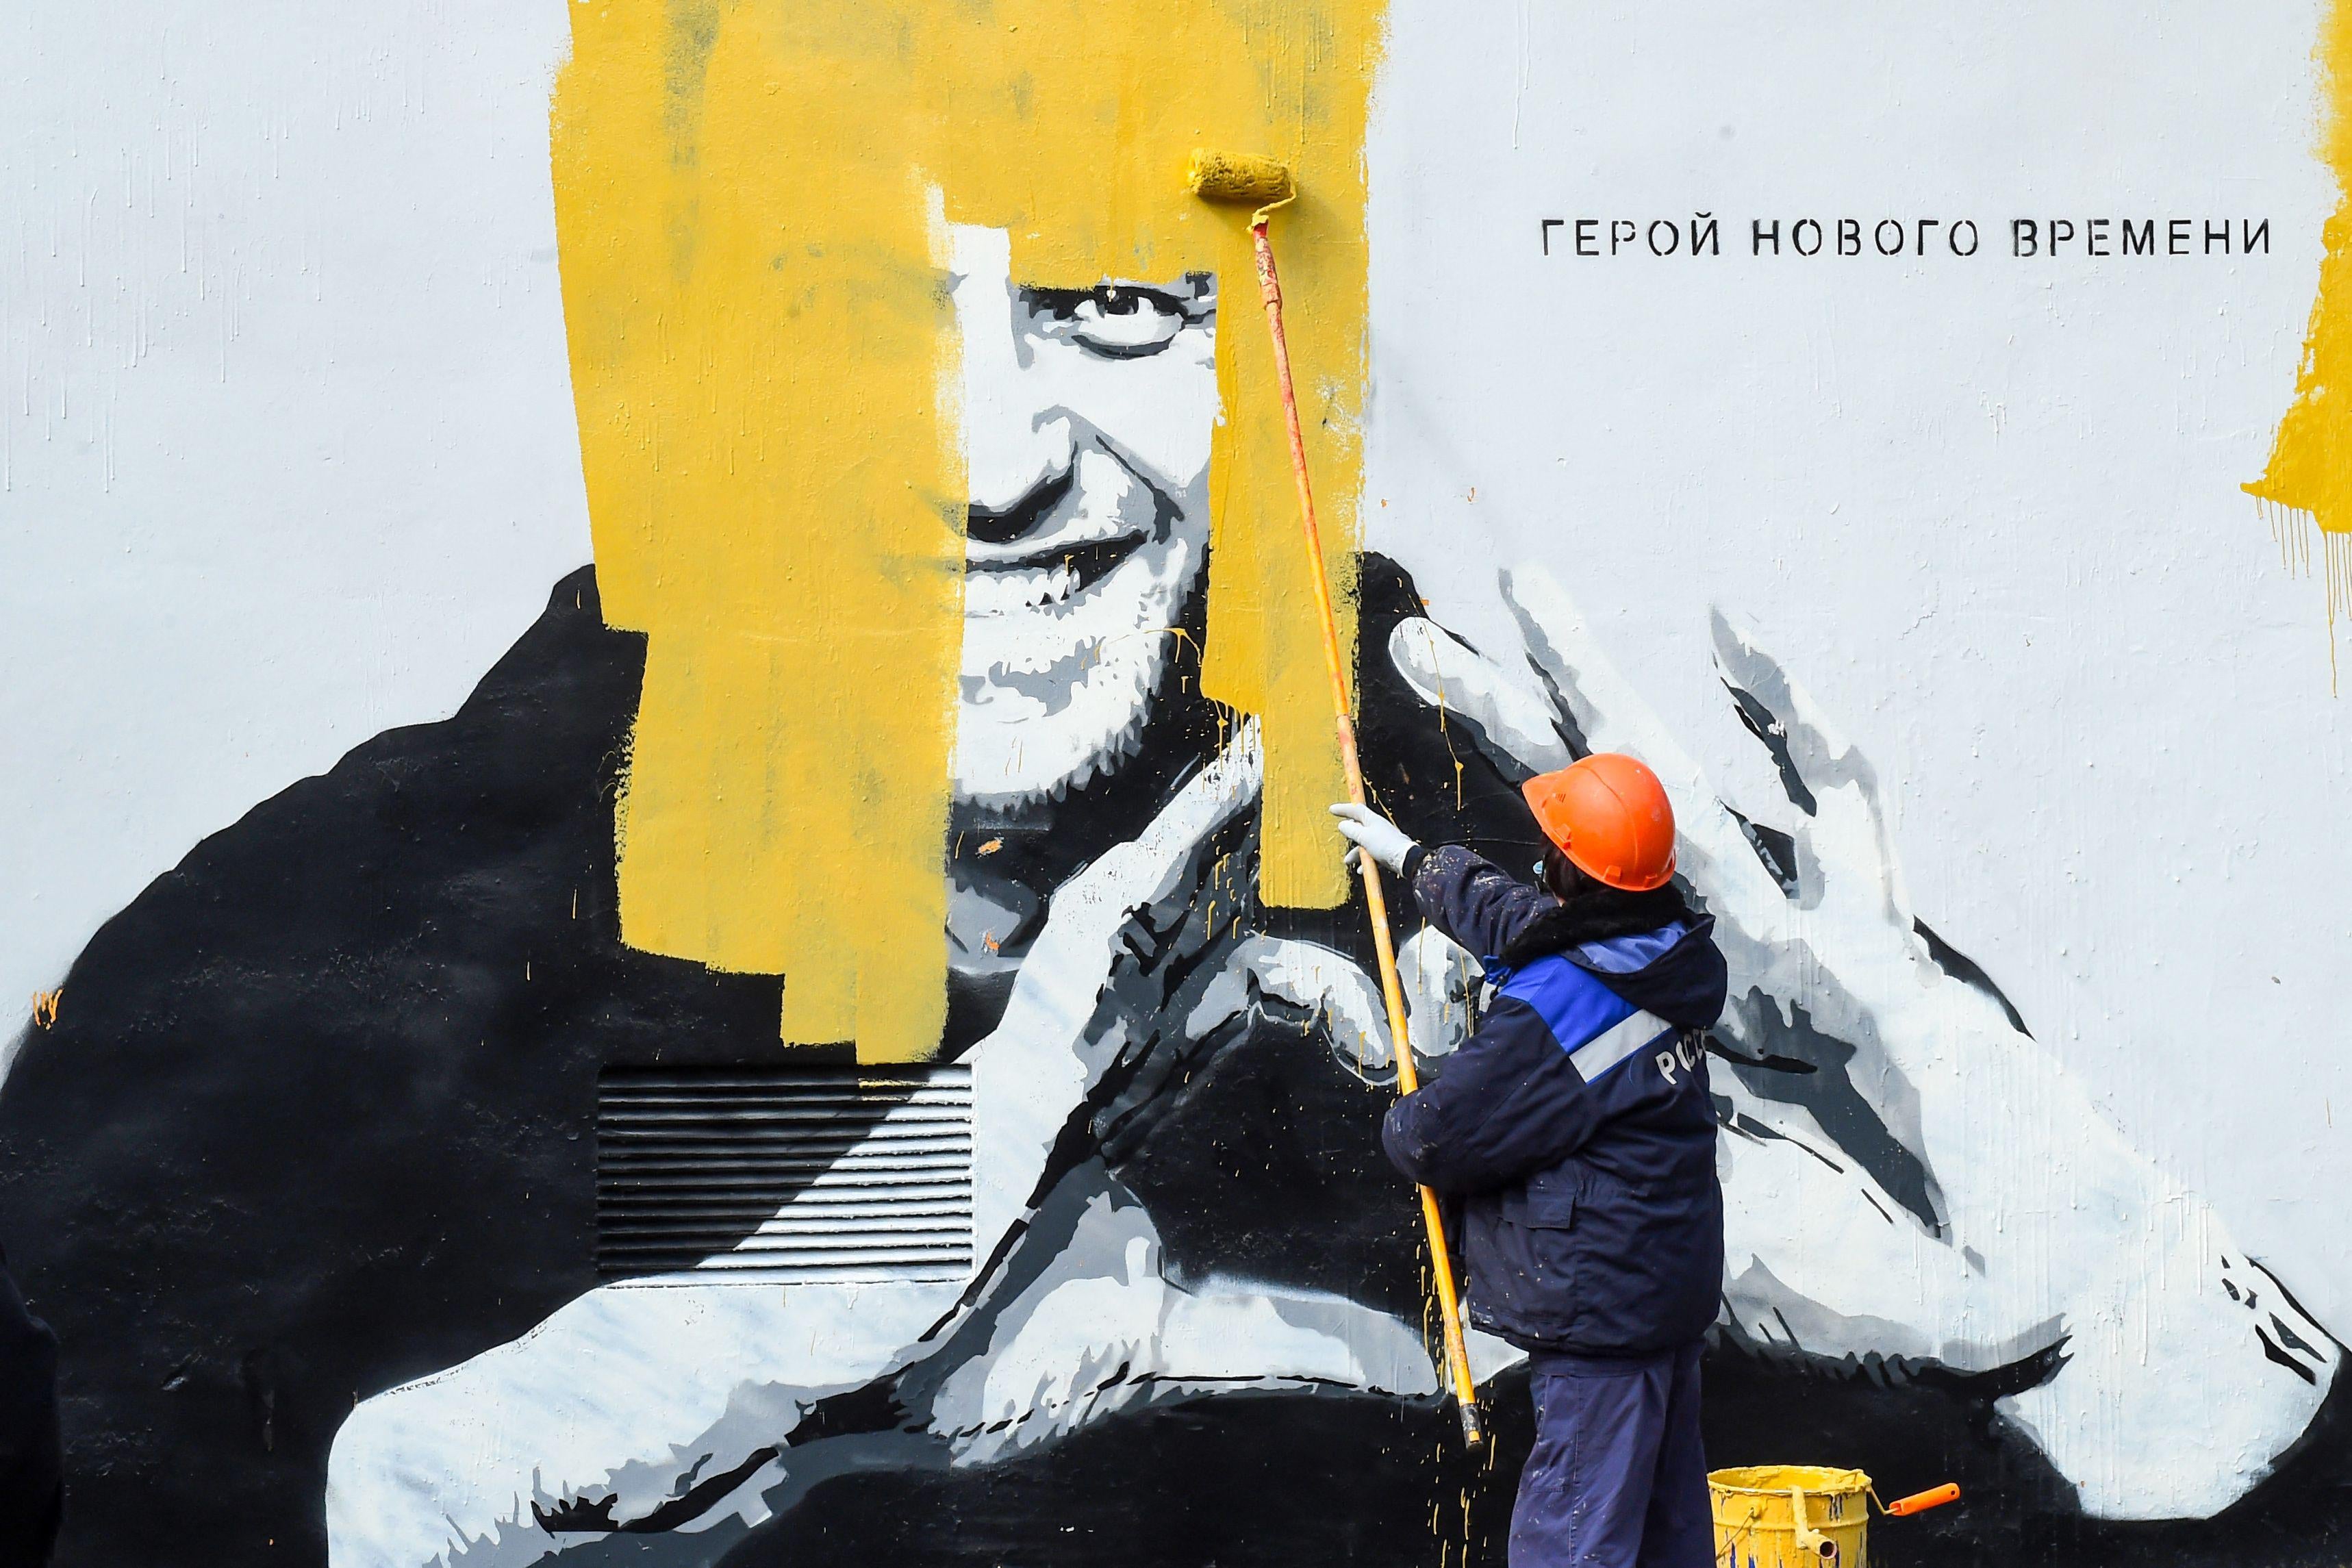 A worker paints over graffiti of jailed Kremlin critic Alexei Navalny in Saint Petersburg on April 28, 2021. The inscription reads: "The hero of the new times". (Photo by Olga MALTSEVA / AFP) (Photo by OLGA MALTSEVA/AFP via Getty Images)